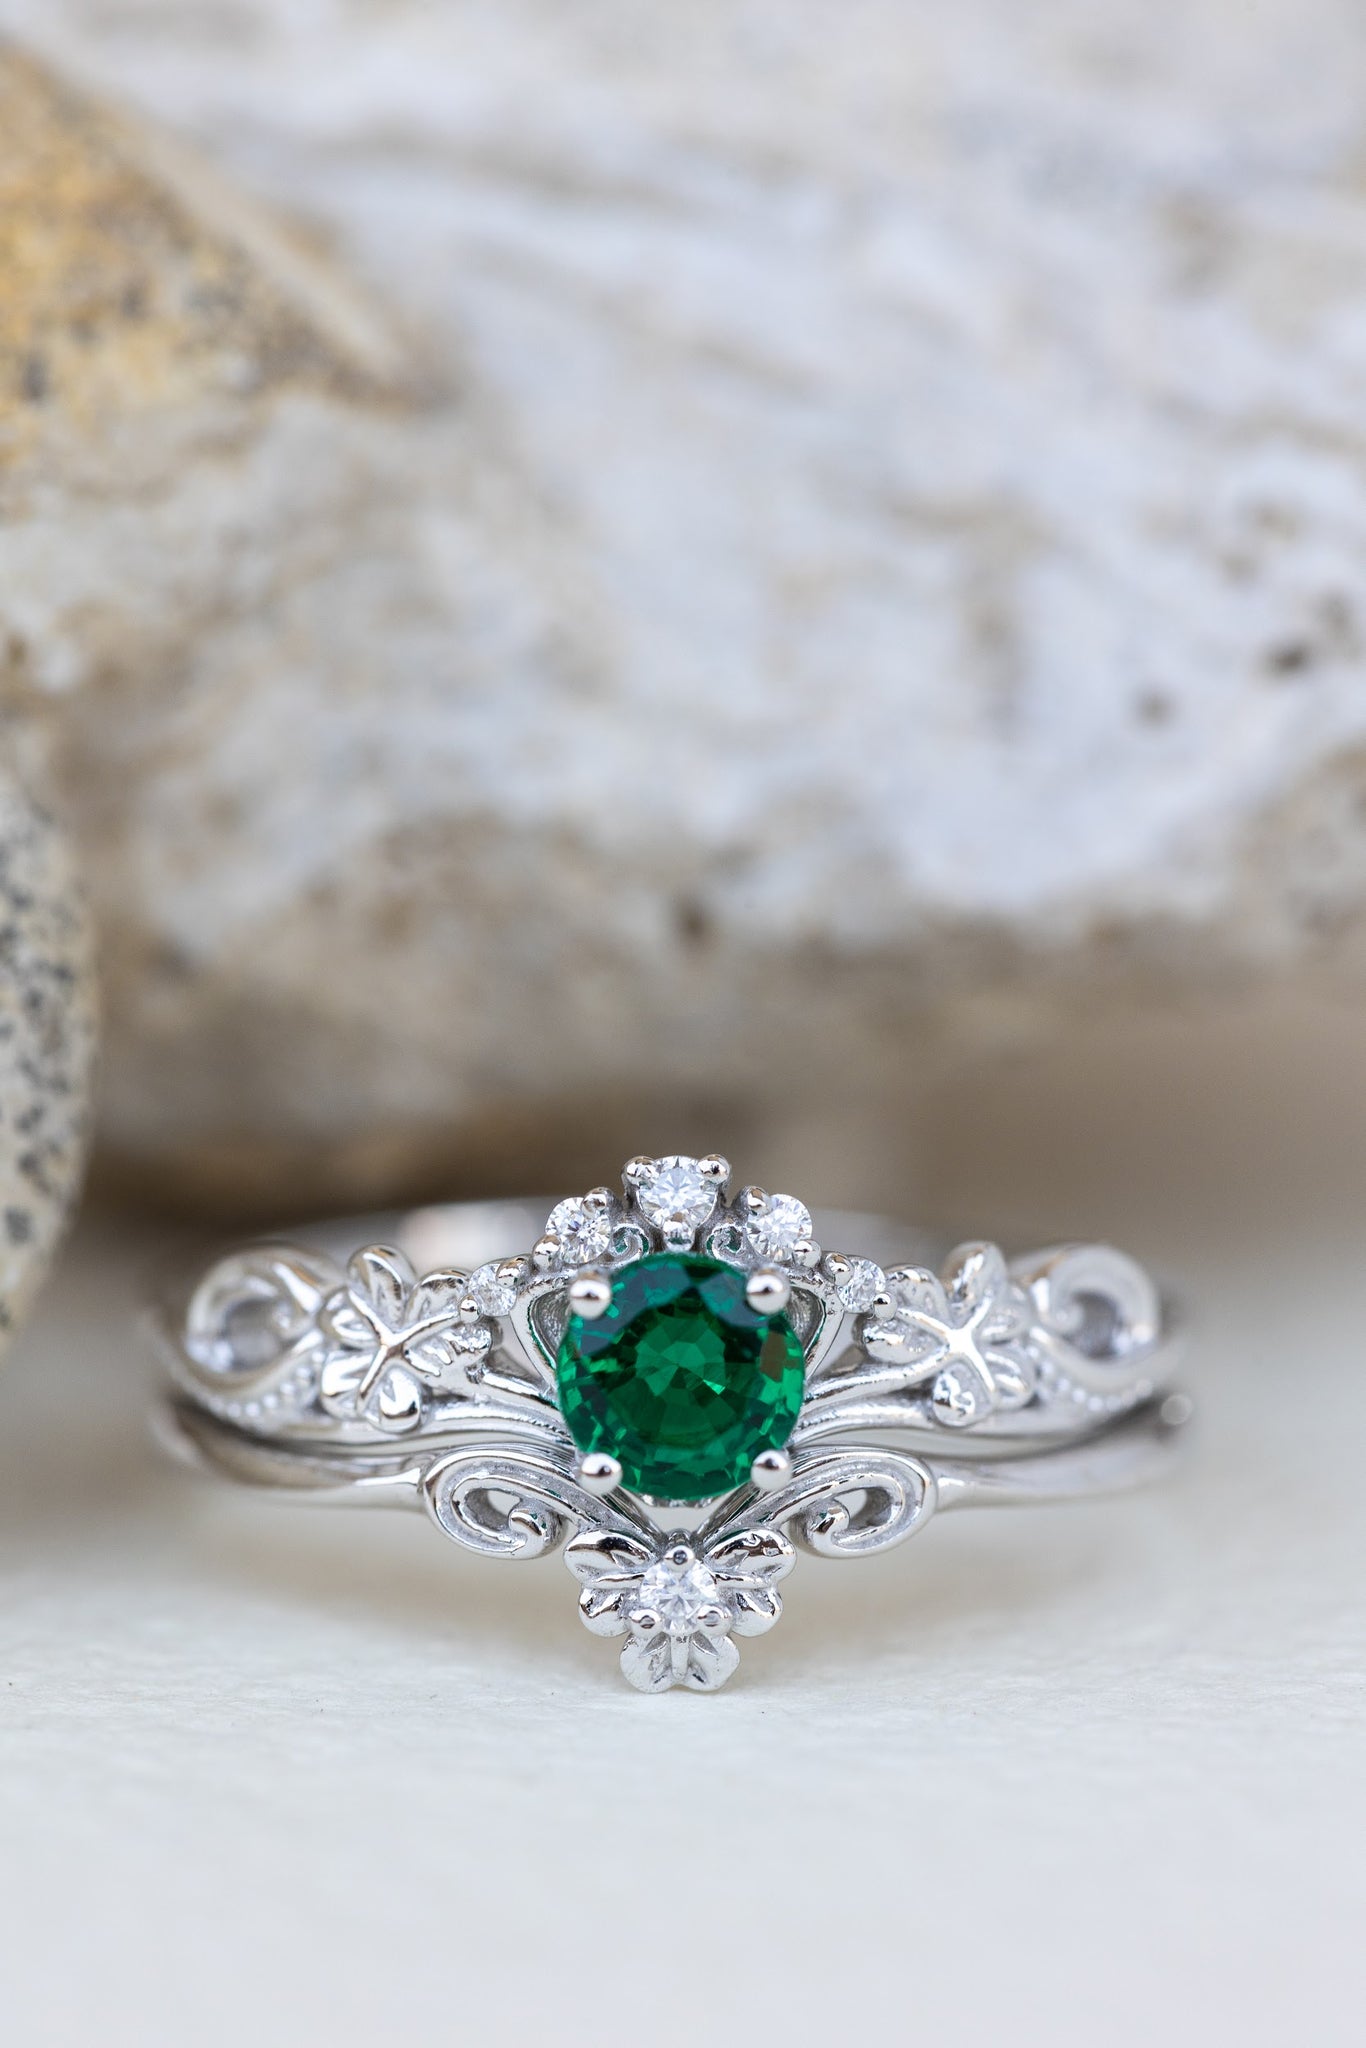 Round Cut Celtic diamond Wedding Ring Set With Emerald In 18K White Gold |  Fascinating Diamonds